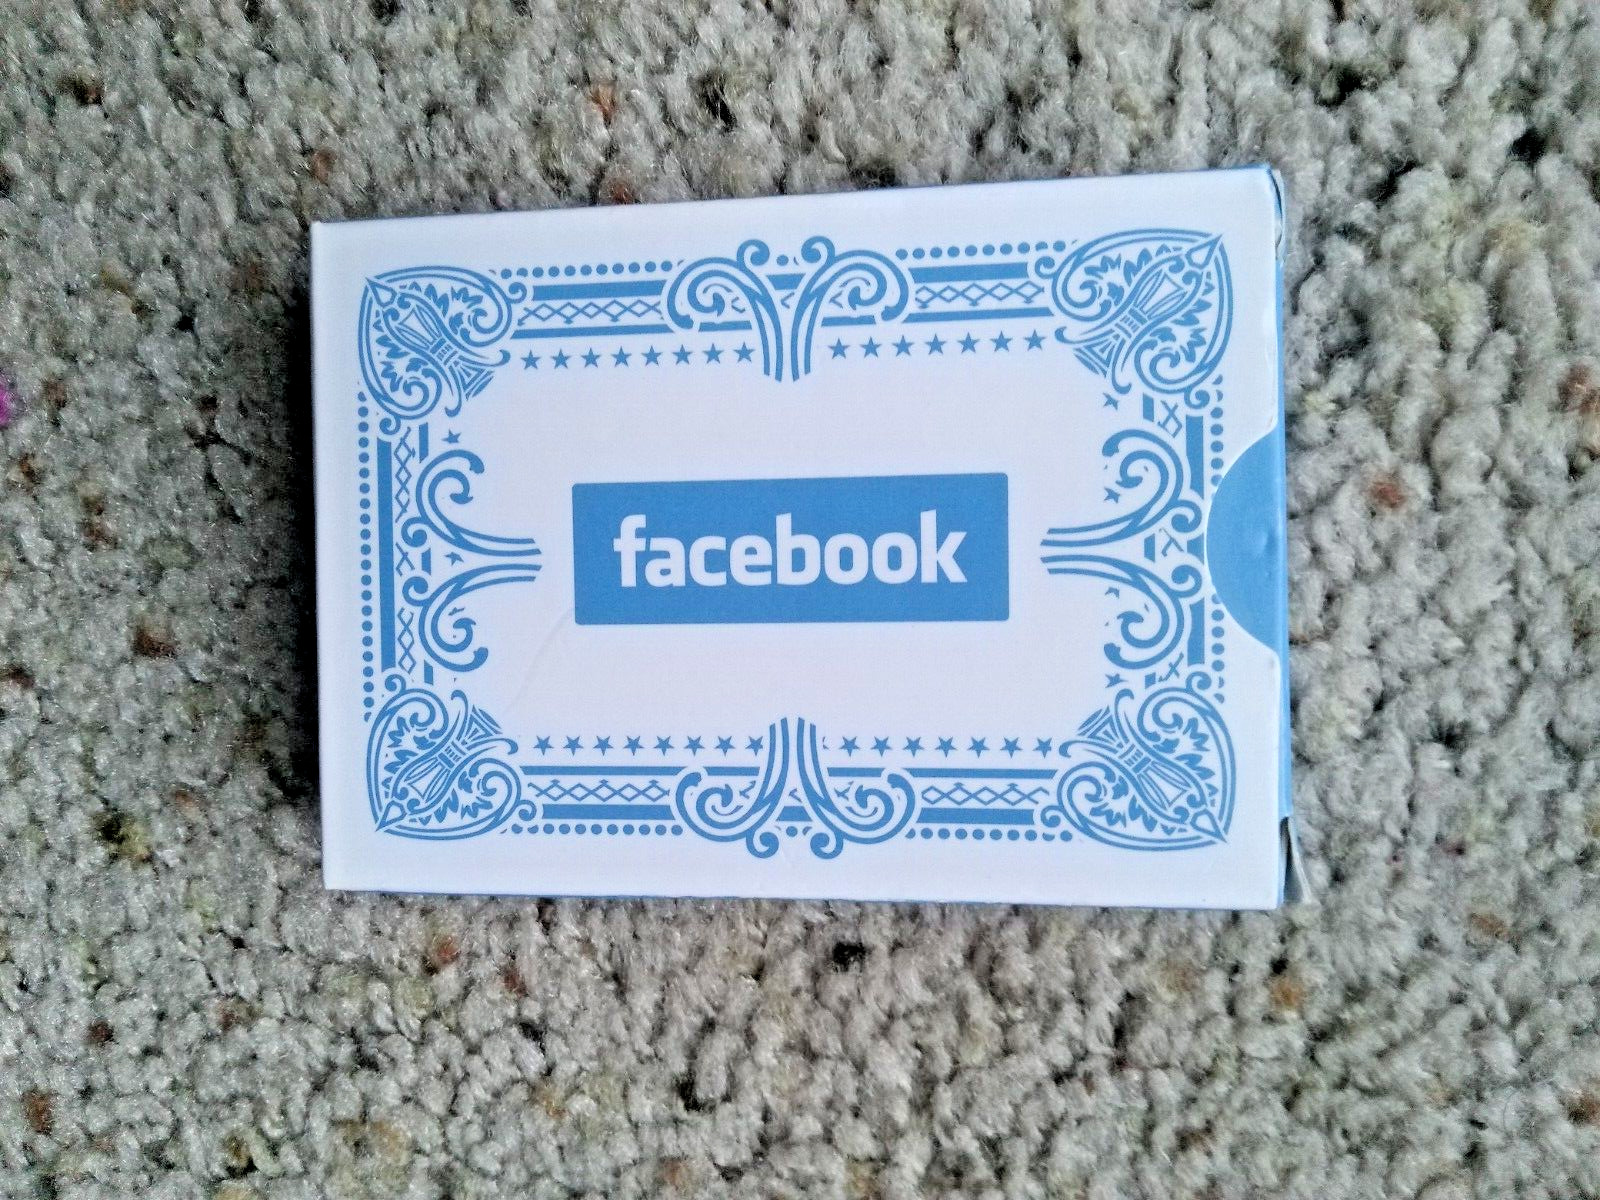 facebook playing cards - 54 cards complete in good condition